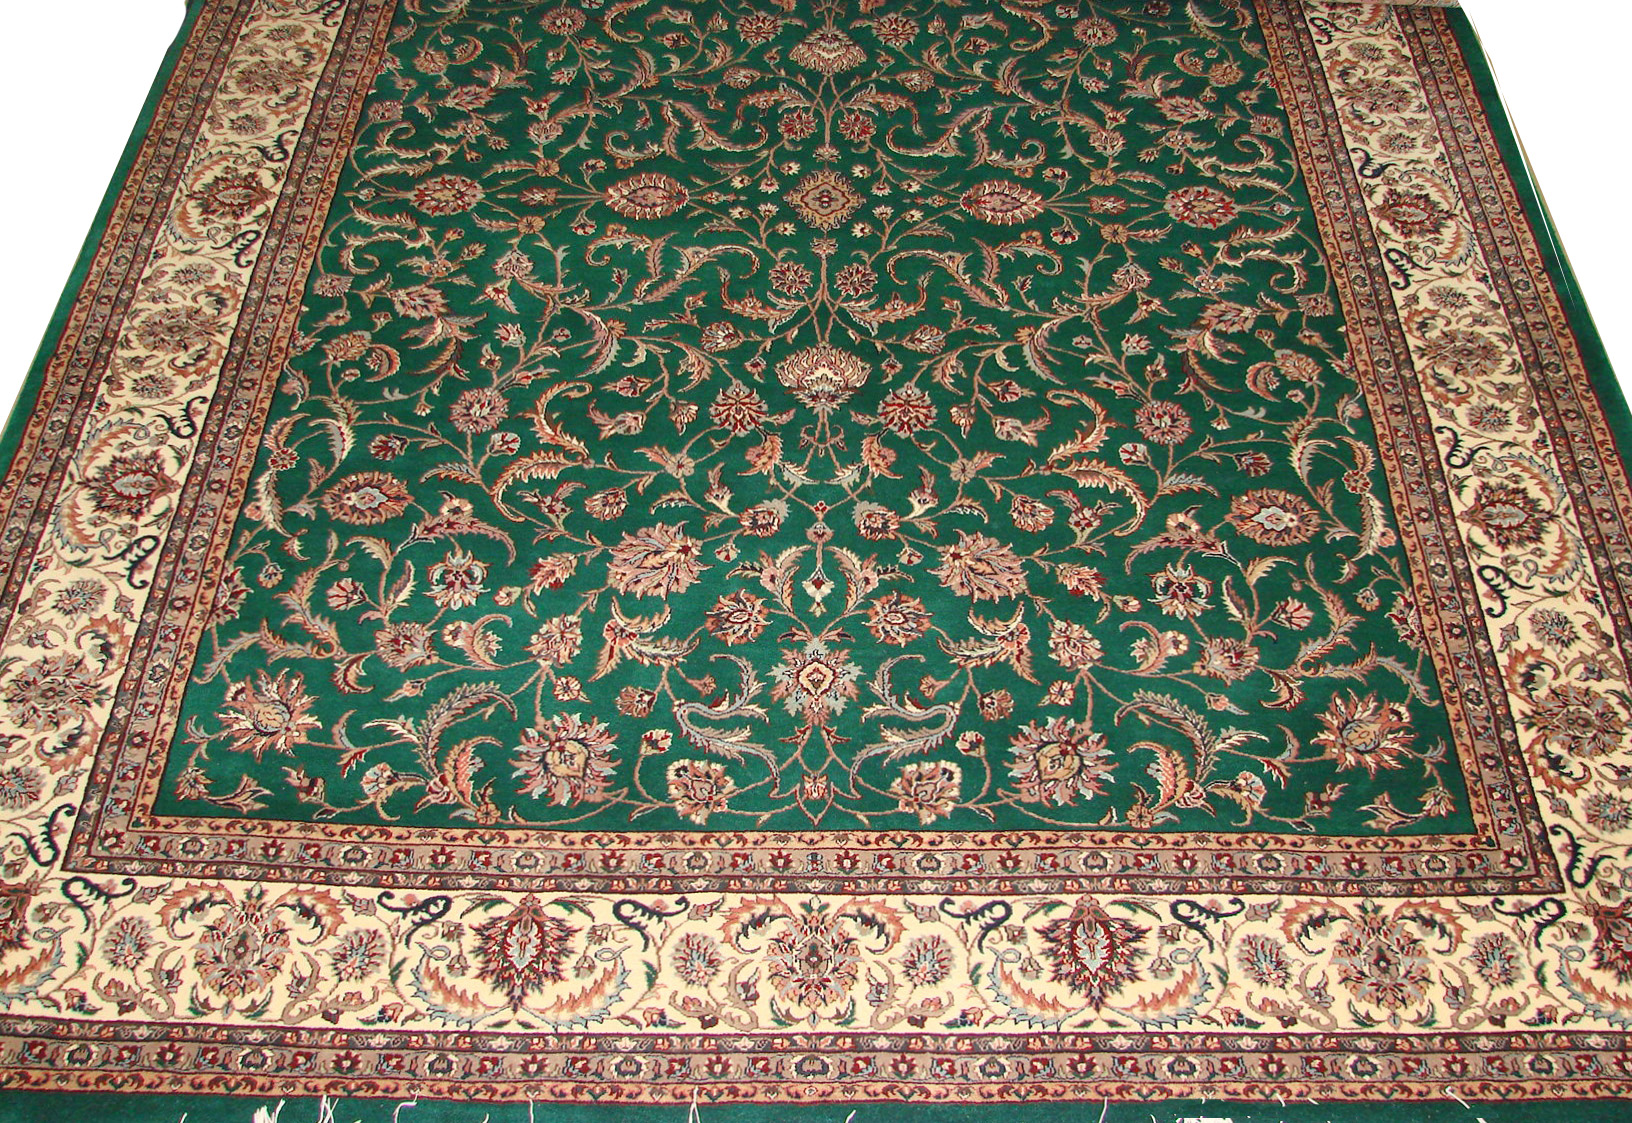 Clearance & Discount Rugs AO-Kashan-JDW 0764 Green & Ivory - Beige Hand Knotted Rug